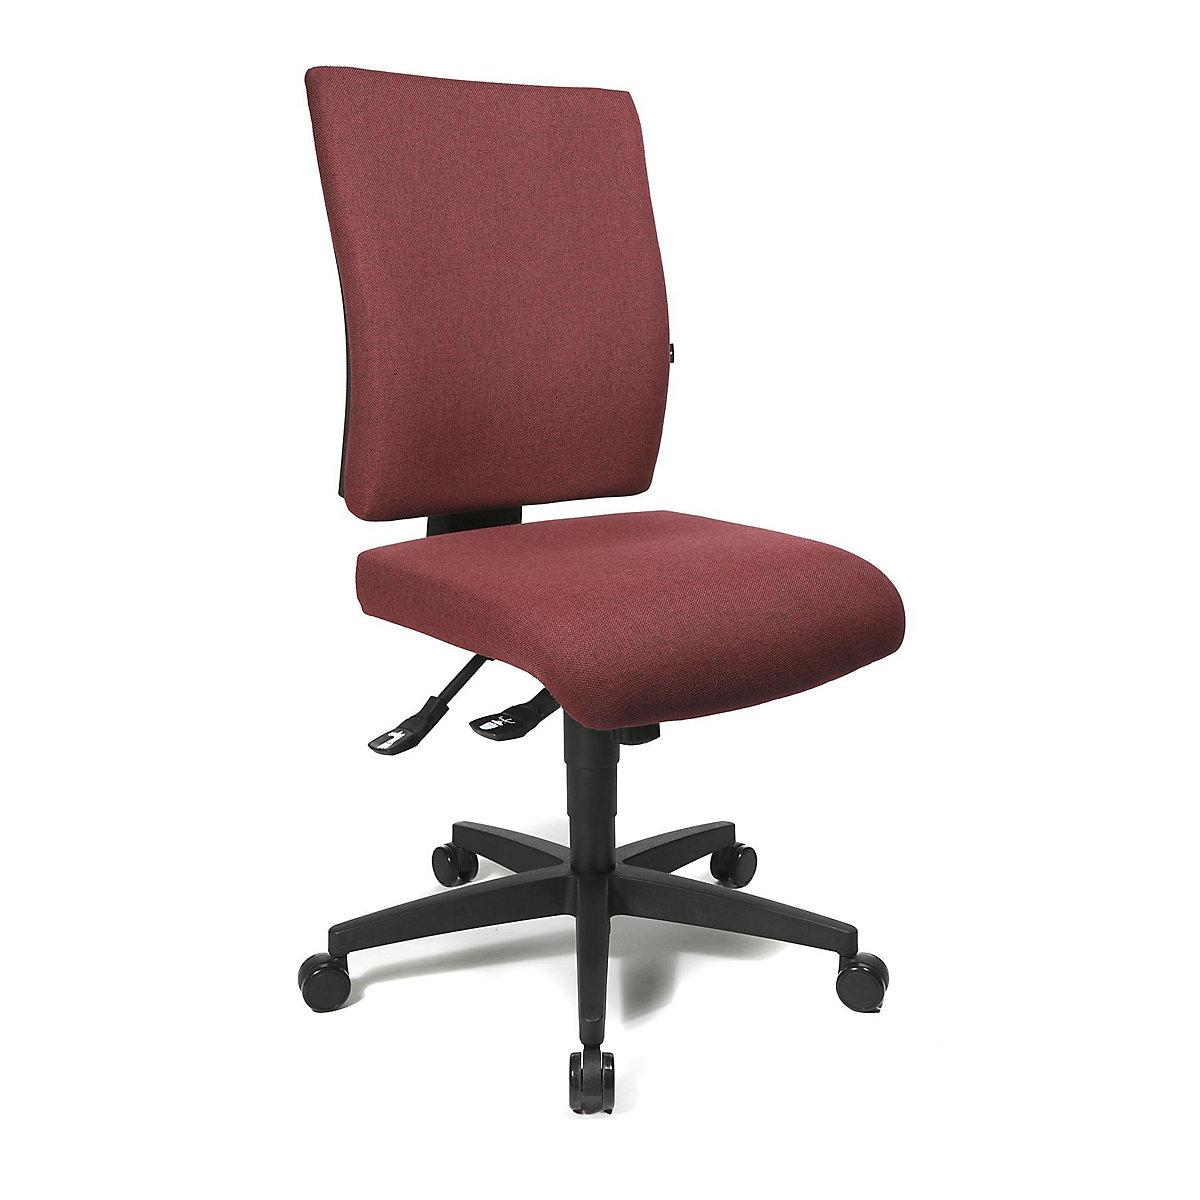 COMFORT office swivel chair – Topstar, height adjustable back rest, bordeaux cover-27